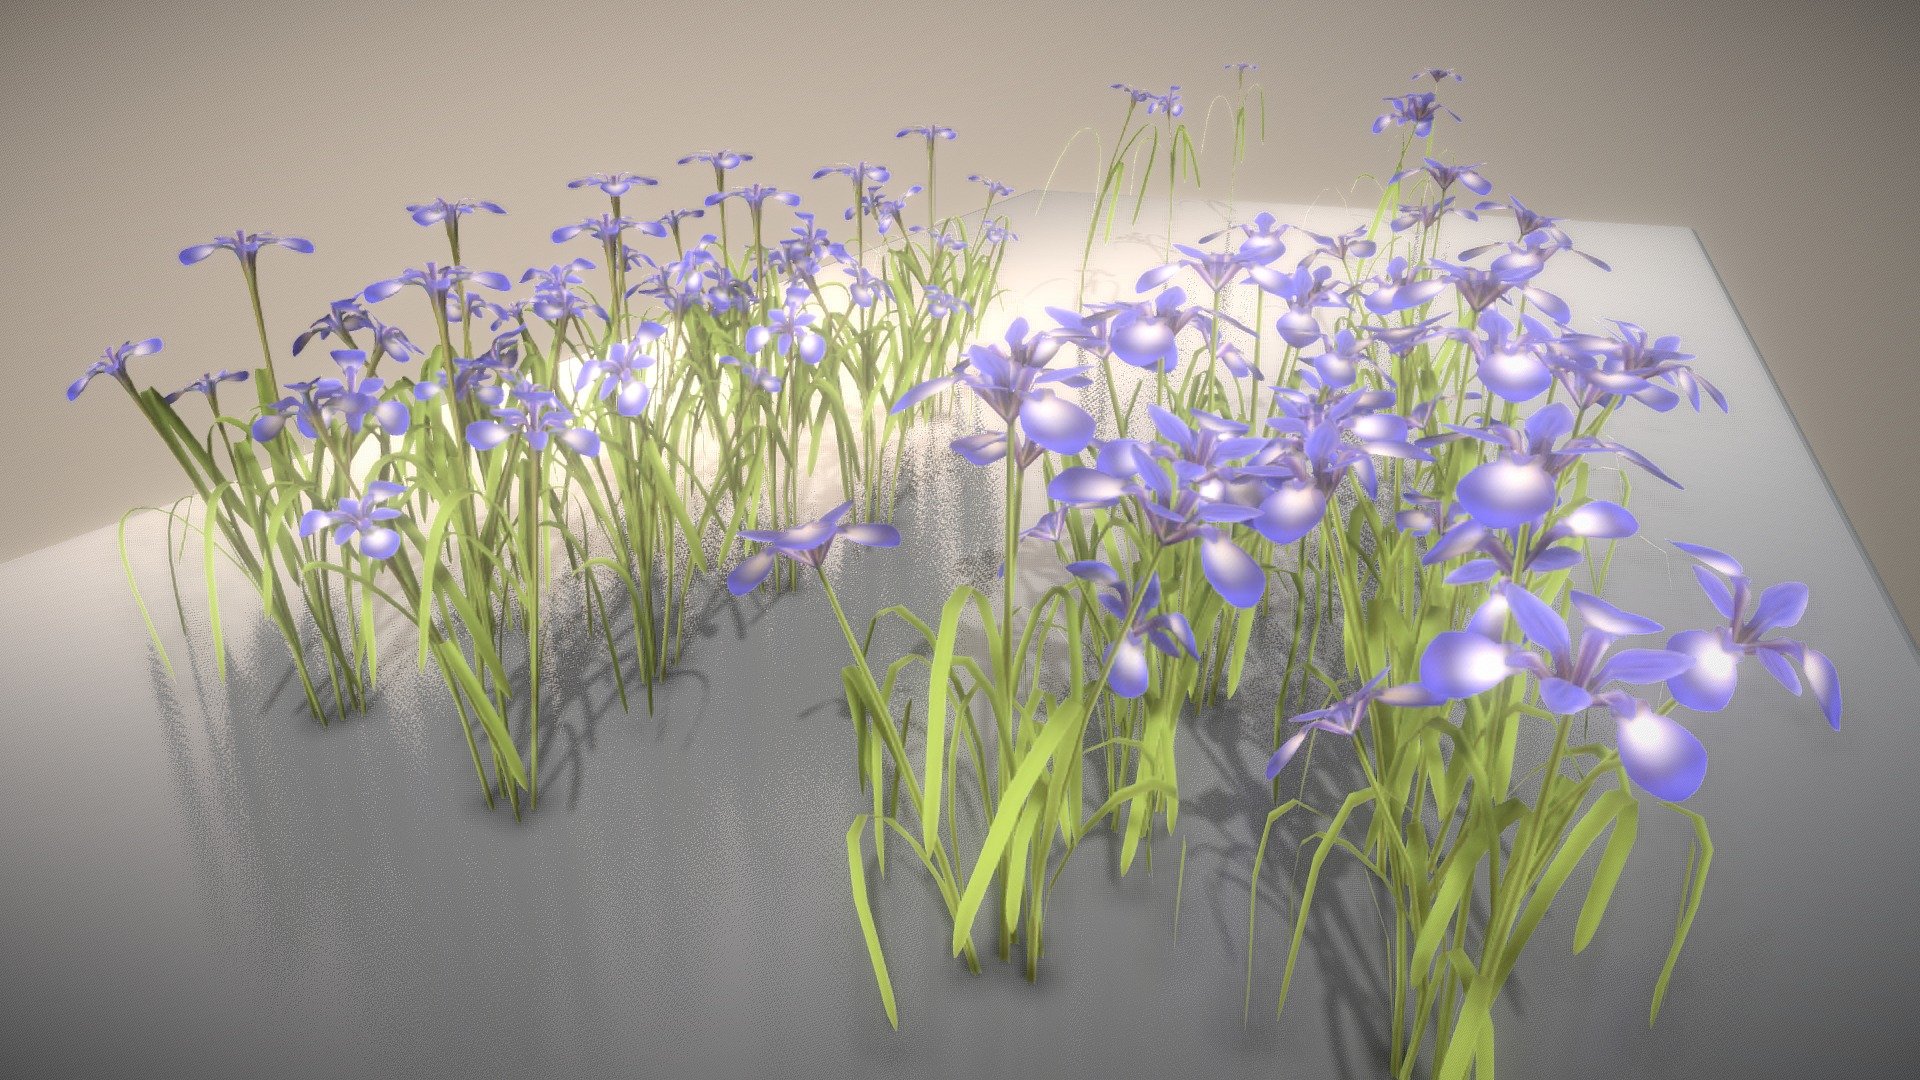 Iris low-poly and mid-poly version.

Here is the High-Poly-Verion - Iris Flower (Low-Poly and Mid-Poly) - 3D model by VIS-All-3D (@VIS-All) 3d model